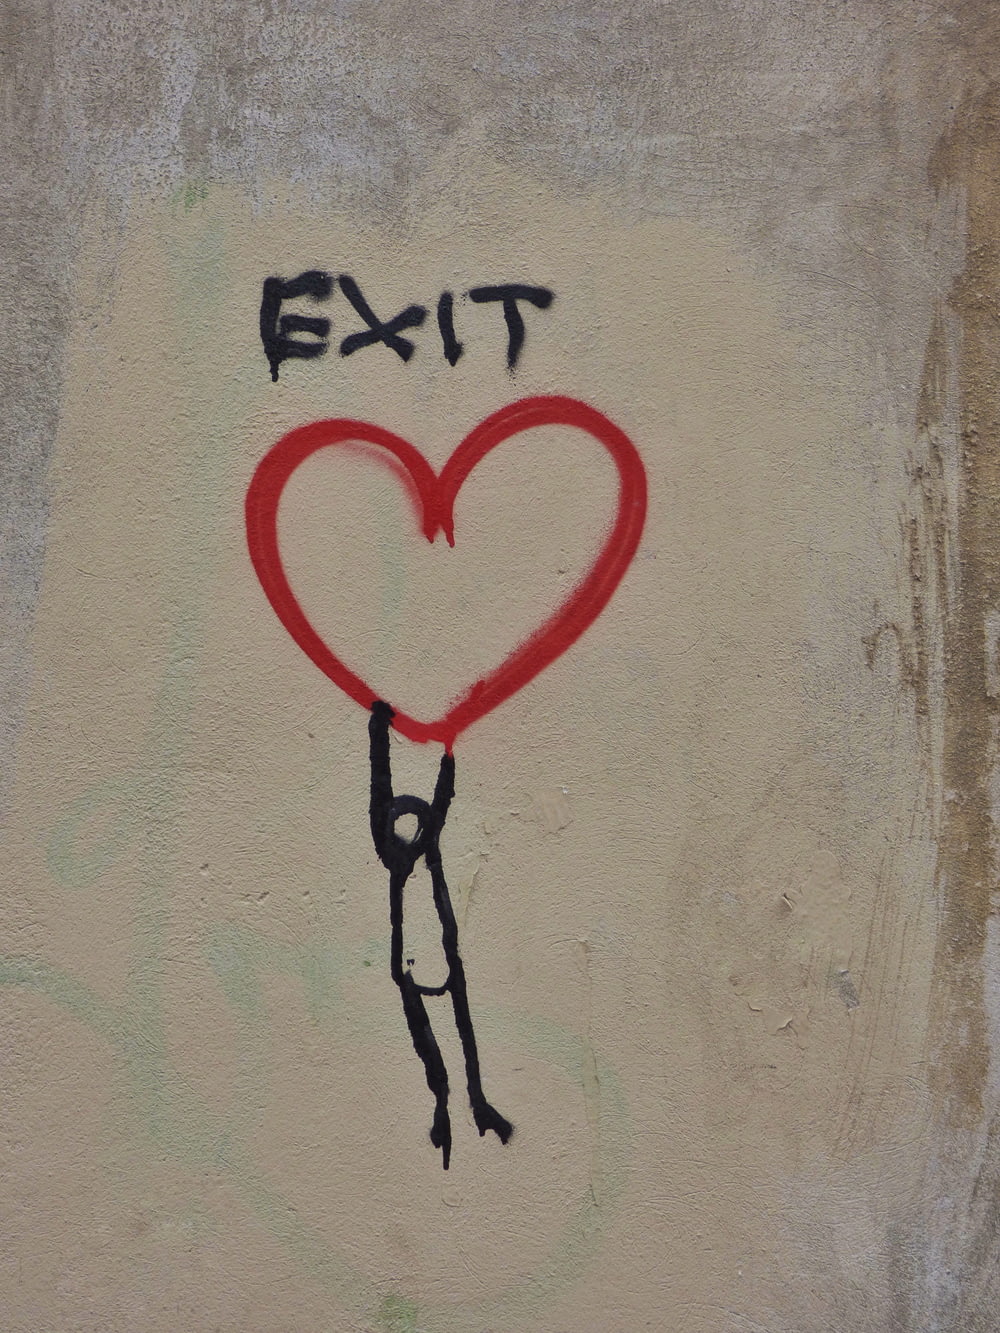 a drawing of a person holding a heart on a wall